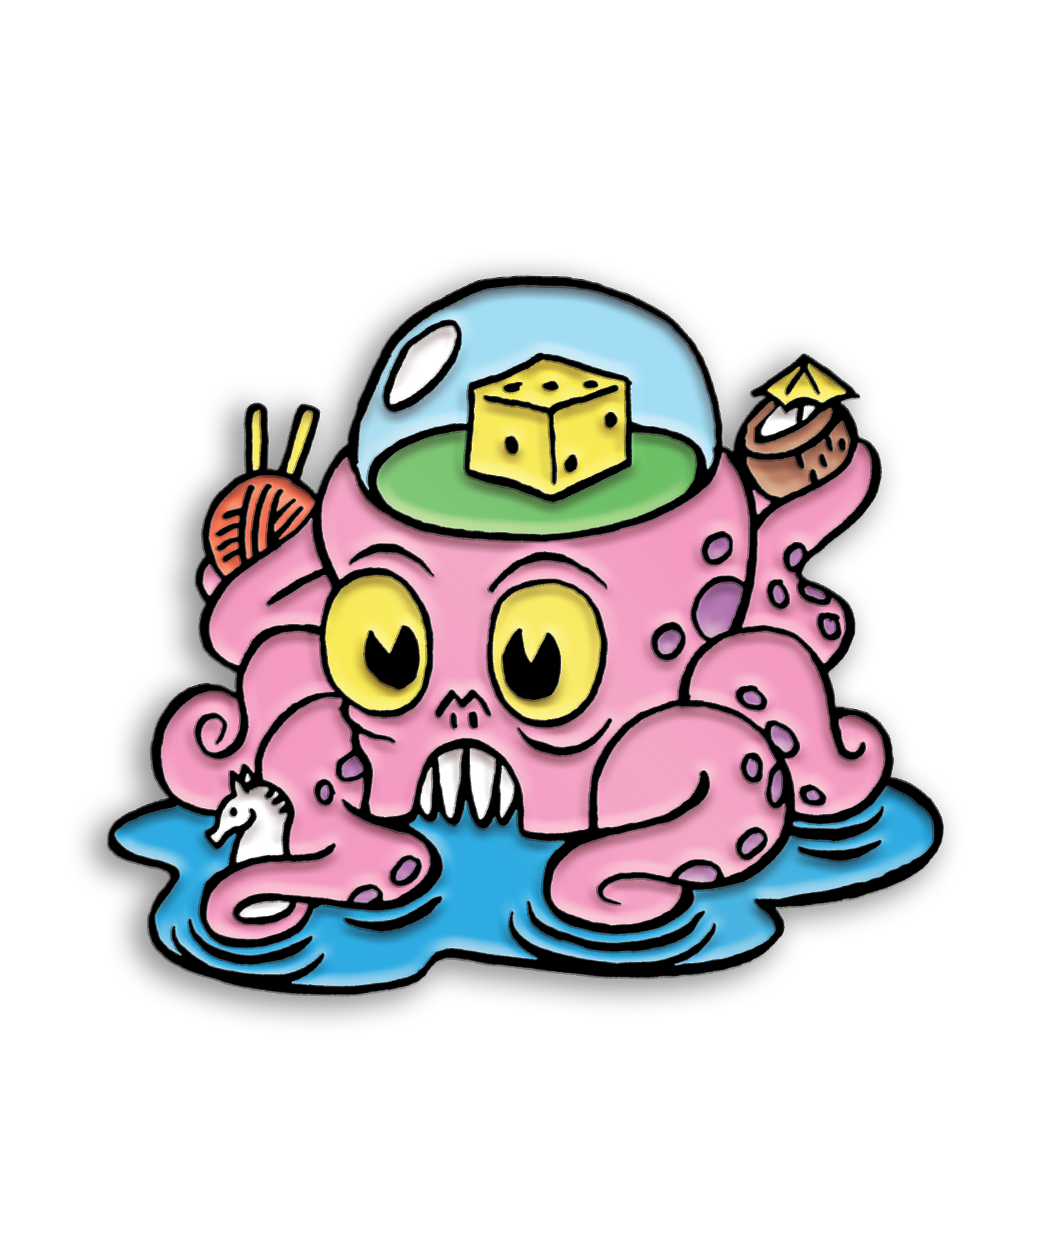 A pink and purple kraken holding various objects such as a coconut, ball of yarn and seahorse. There is a die in a dome on its head. 